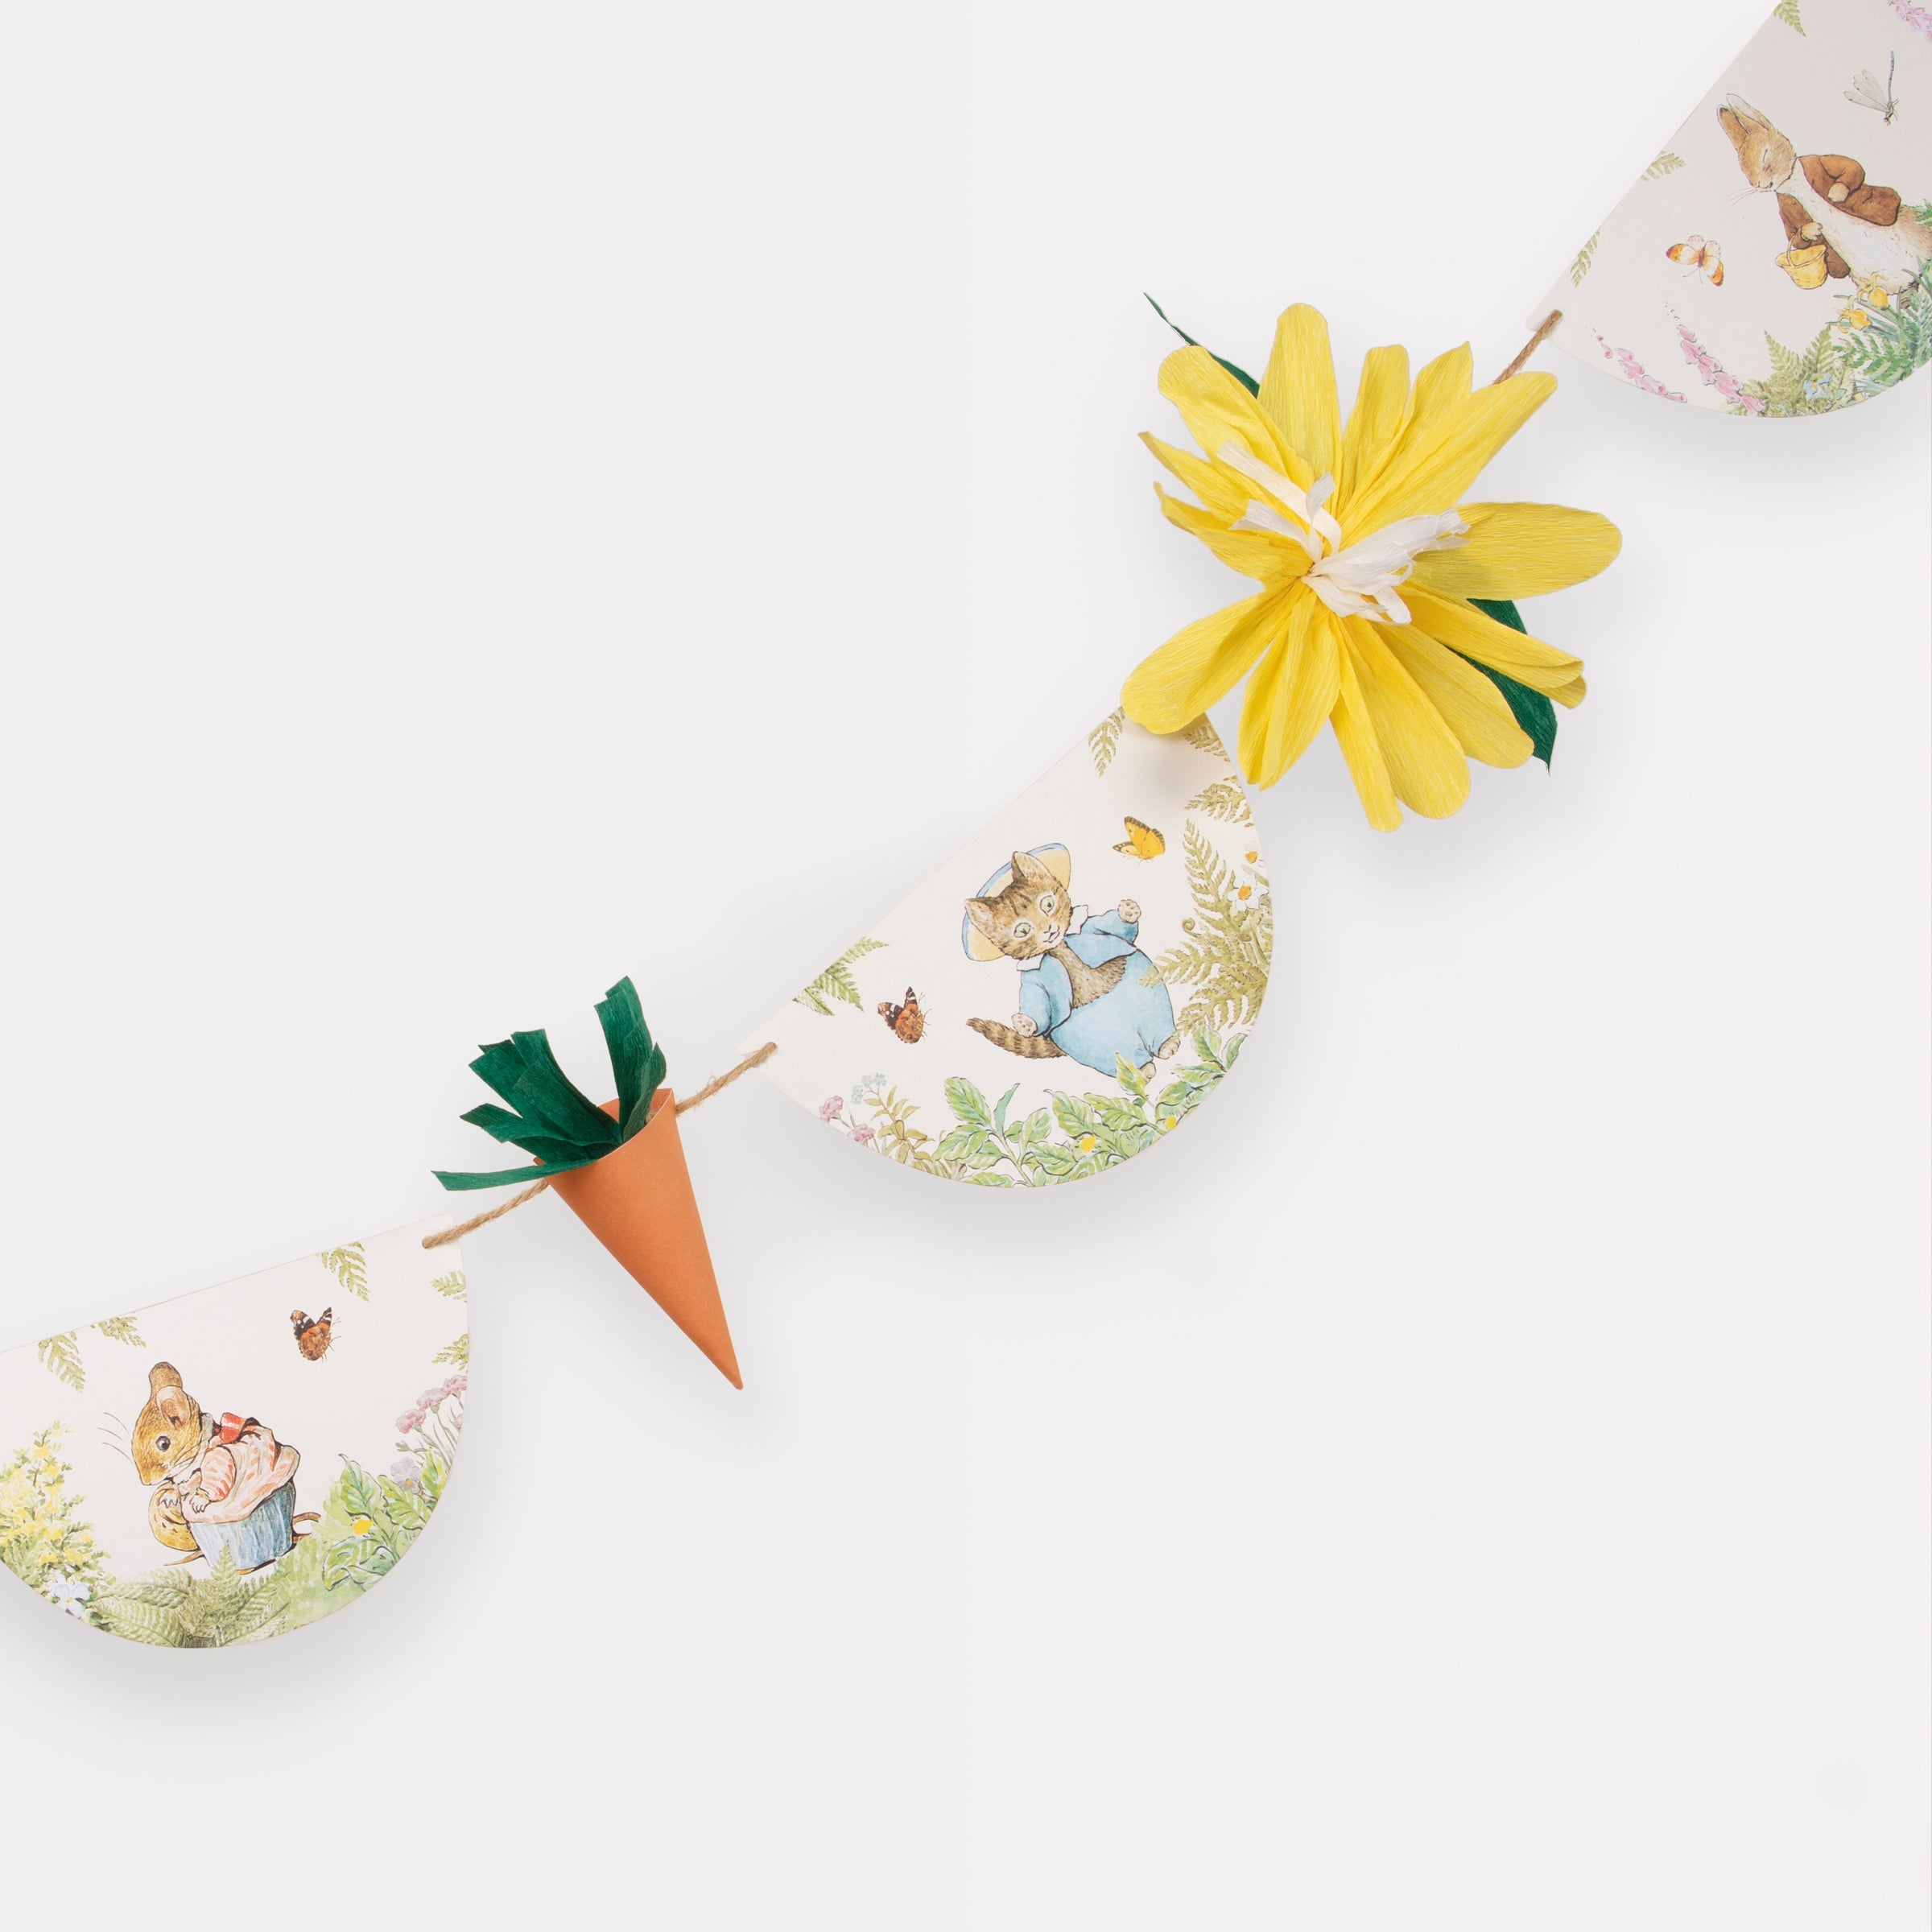 If you're having a Peter Rabbit party or need Easter party decoration ideas then you'll love our Peter Rabbit garland.